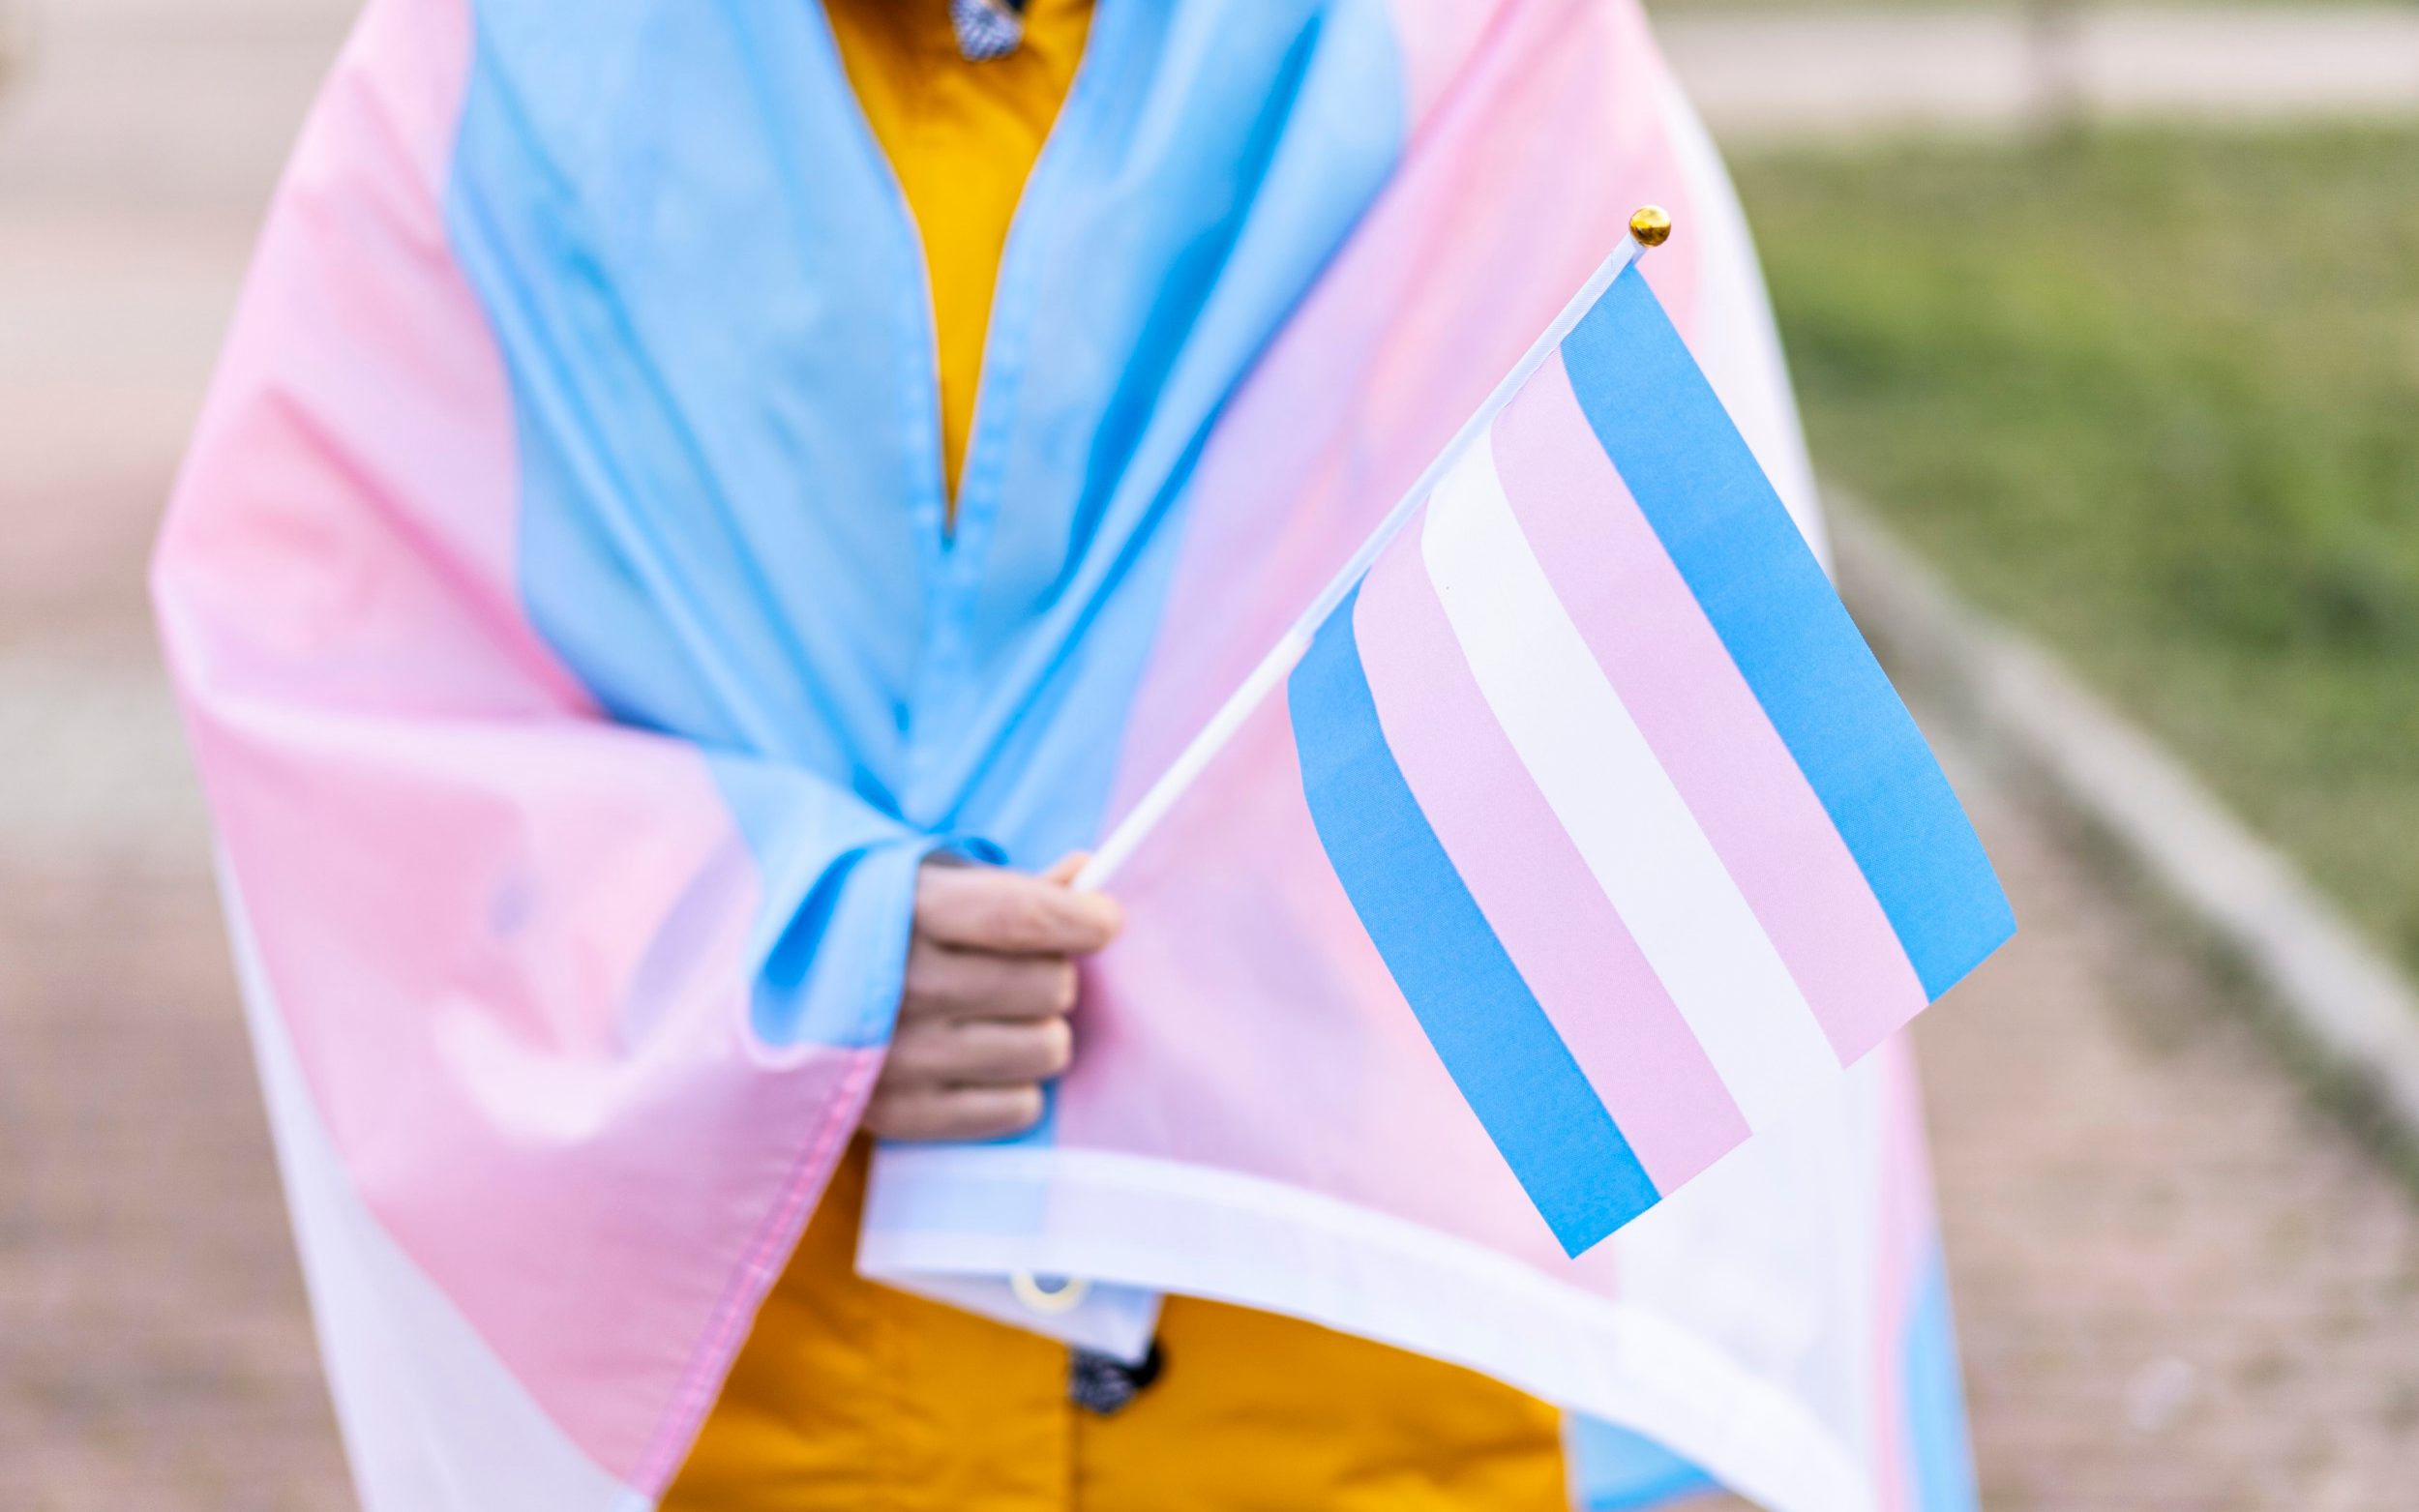 sweden lowers gender reassignment age in controversial new law